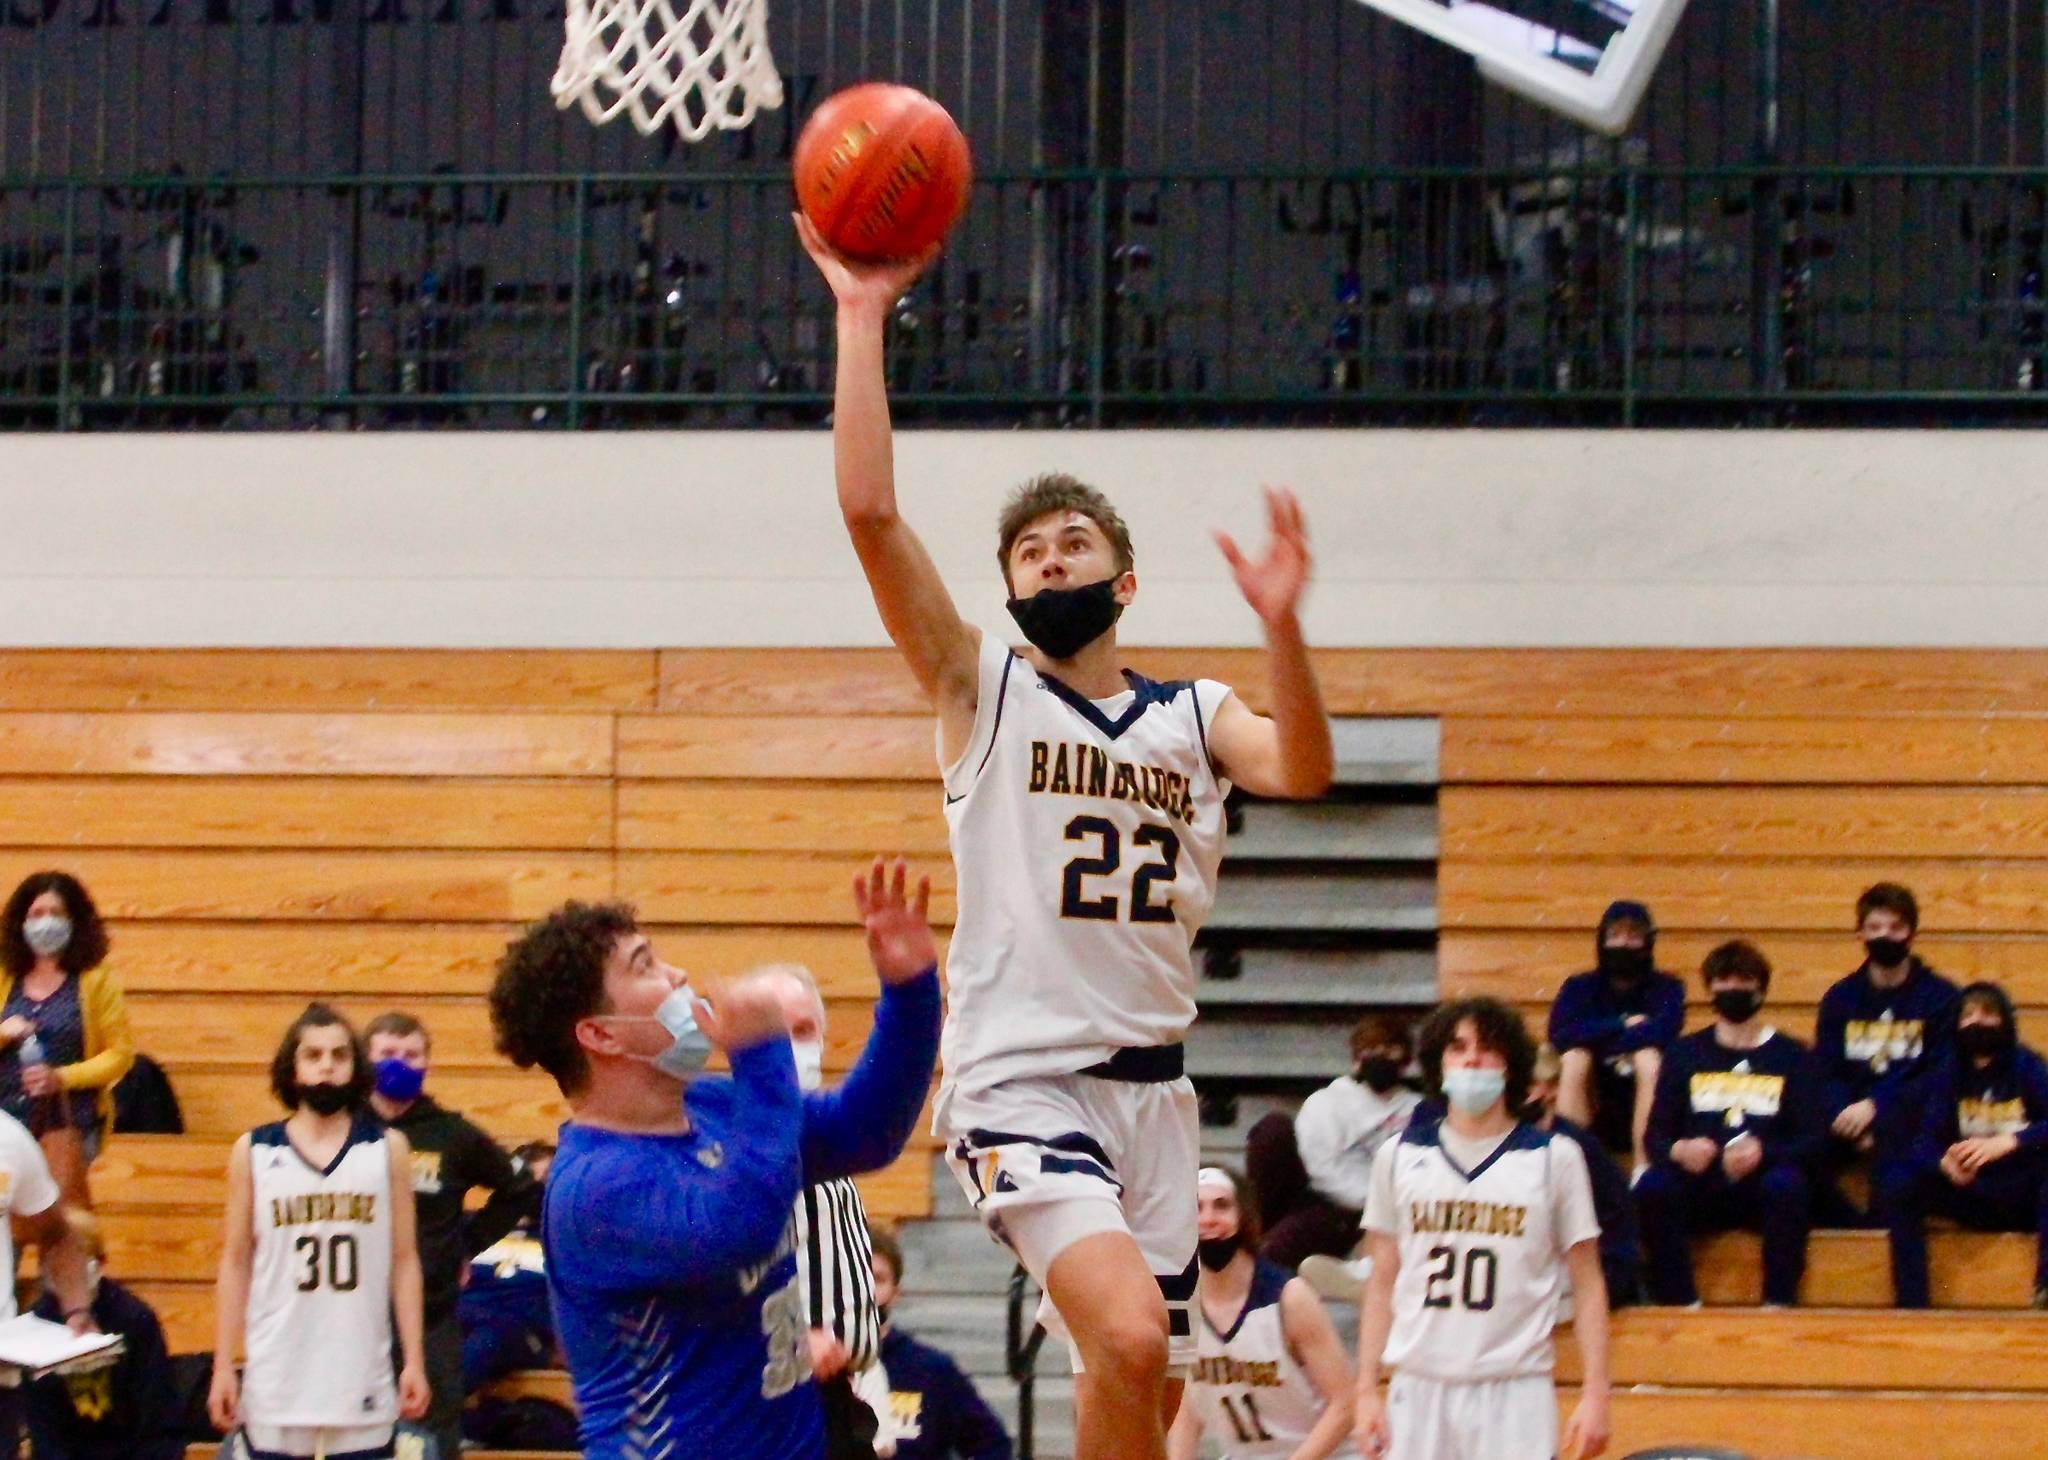 Everett Moore gets up and over the Olympic defense for a shot attempt. Moore hit four 3-pointers in Bainbridge’s win over the Trojans. (Mark Krulish/Kitsap News Group)